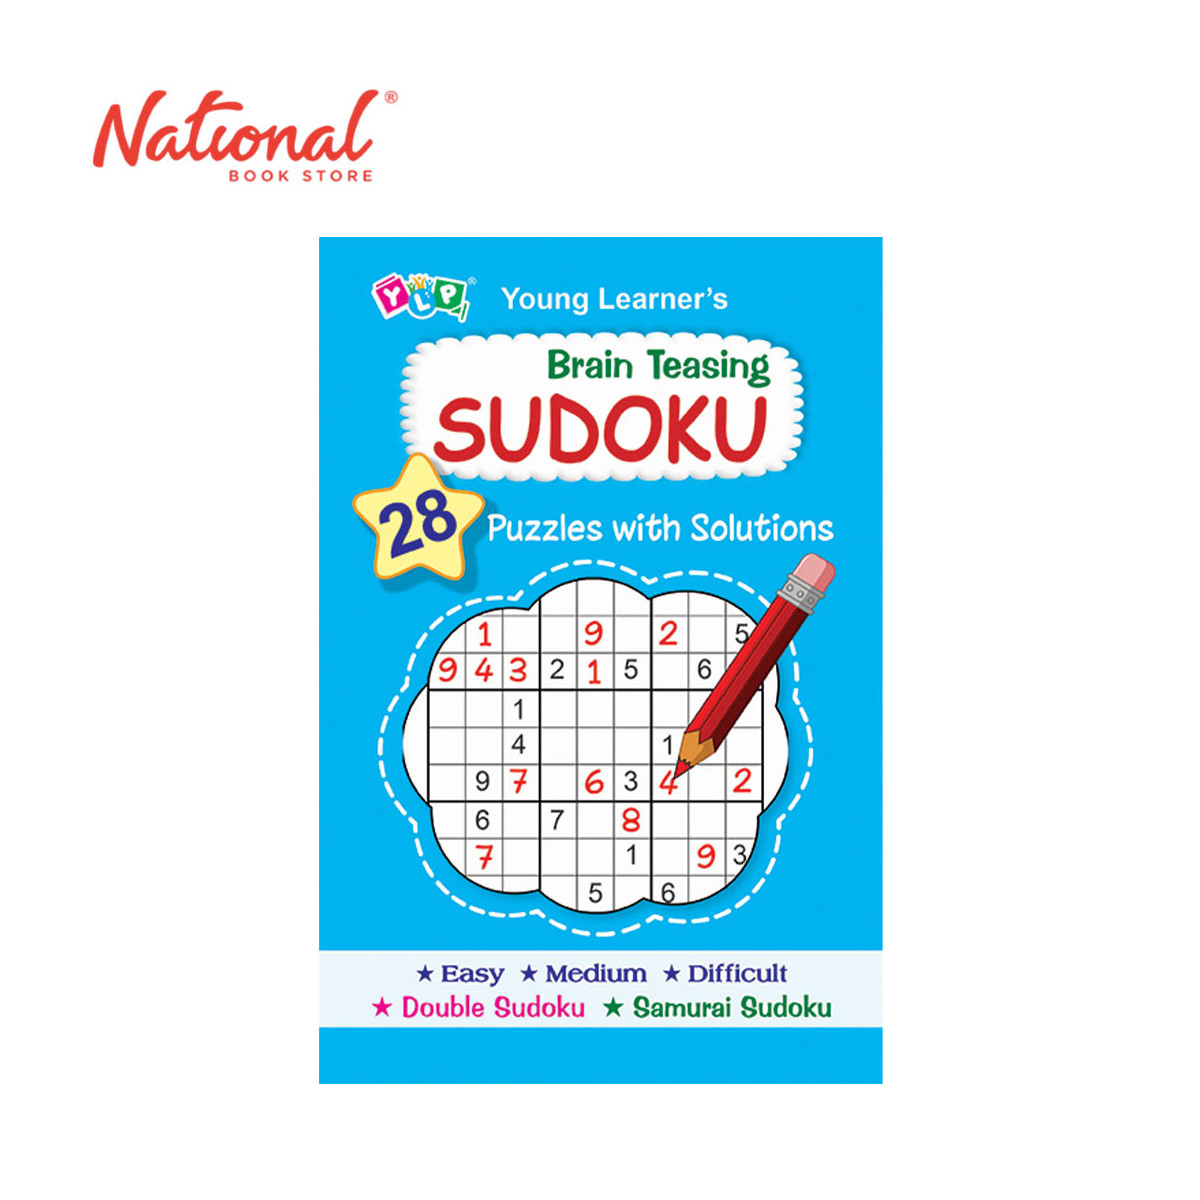 Young Learner's: Brain Teasing Sudoku - Trade Paperback - Hobbies for Kids - Puzzles for Kids